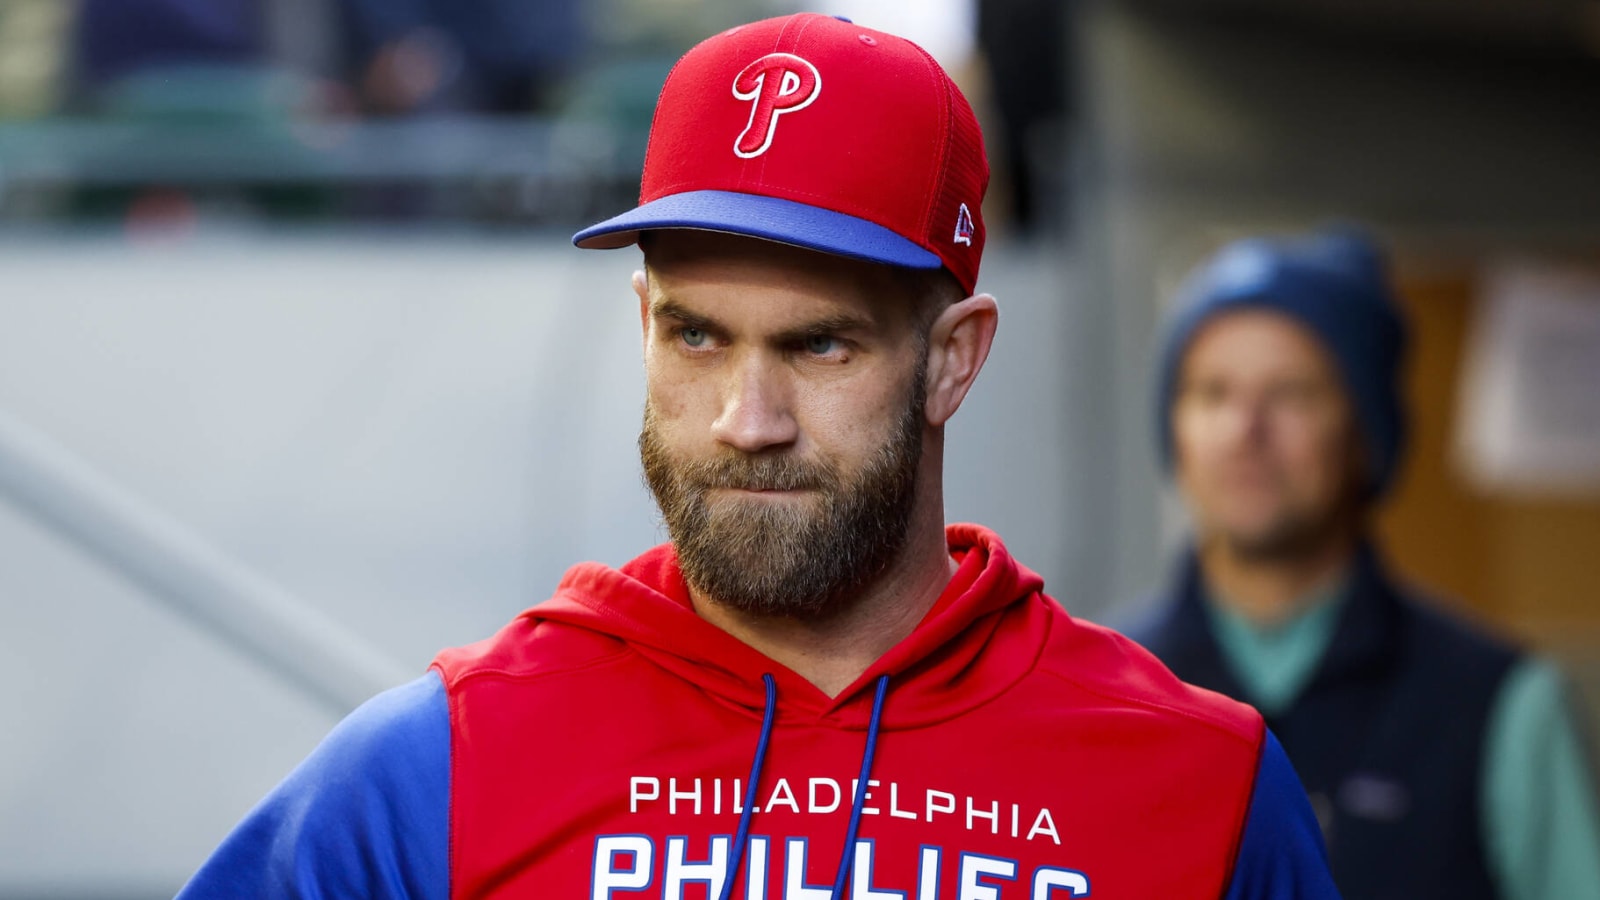 Phillies exec: 'Underrated' Bryce Harper 'a Hall of Fame' talent'